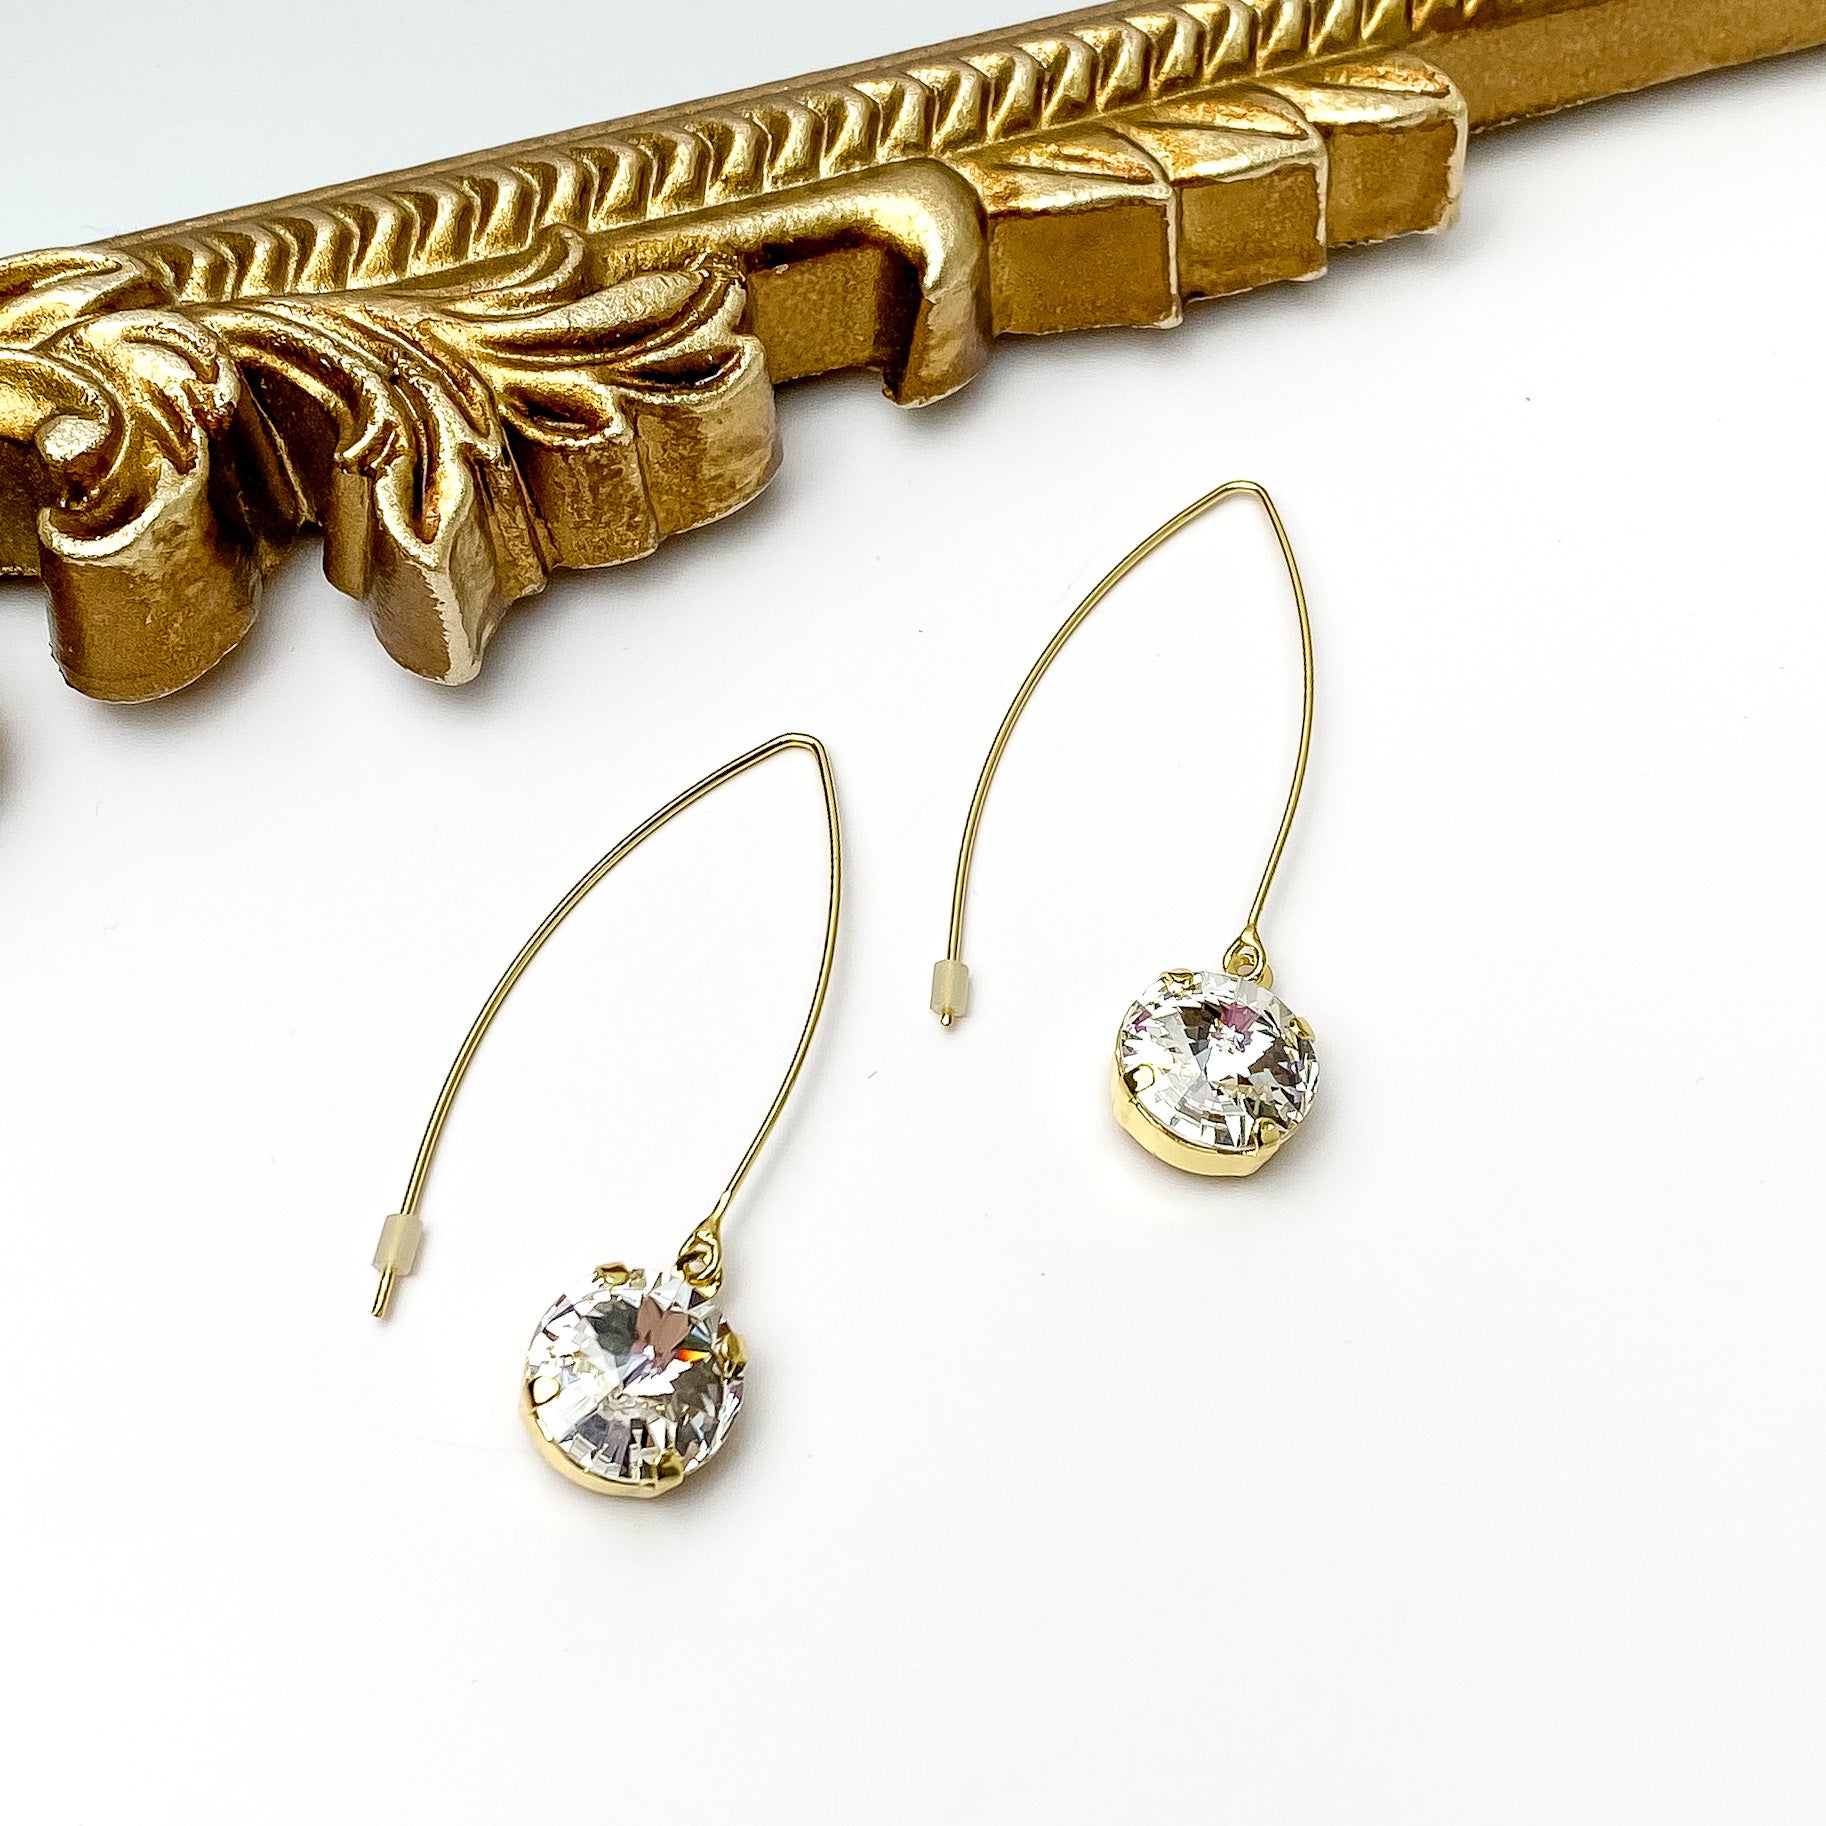 Gold, kidney wire dangle earrings. These earrings include a round clear crystal drop. These earrings are pictured in front of a gold mirror on a white background. 